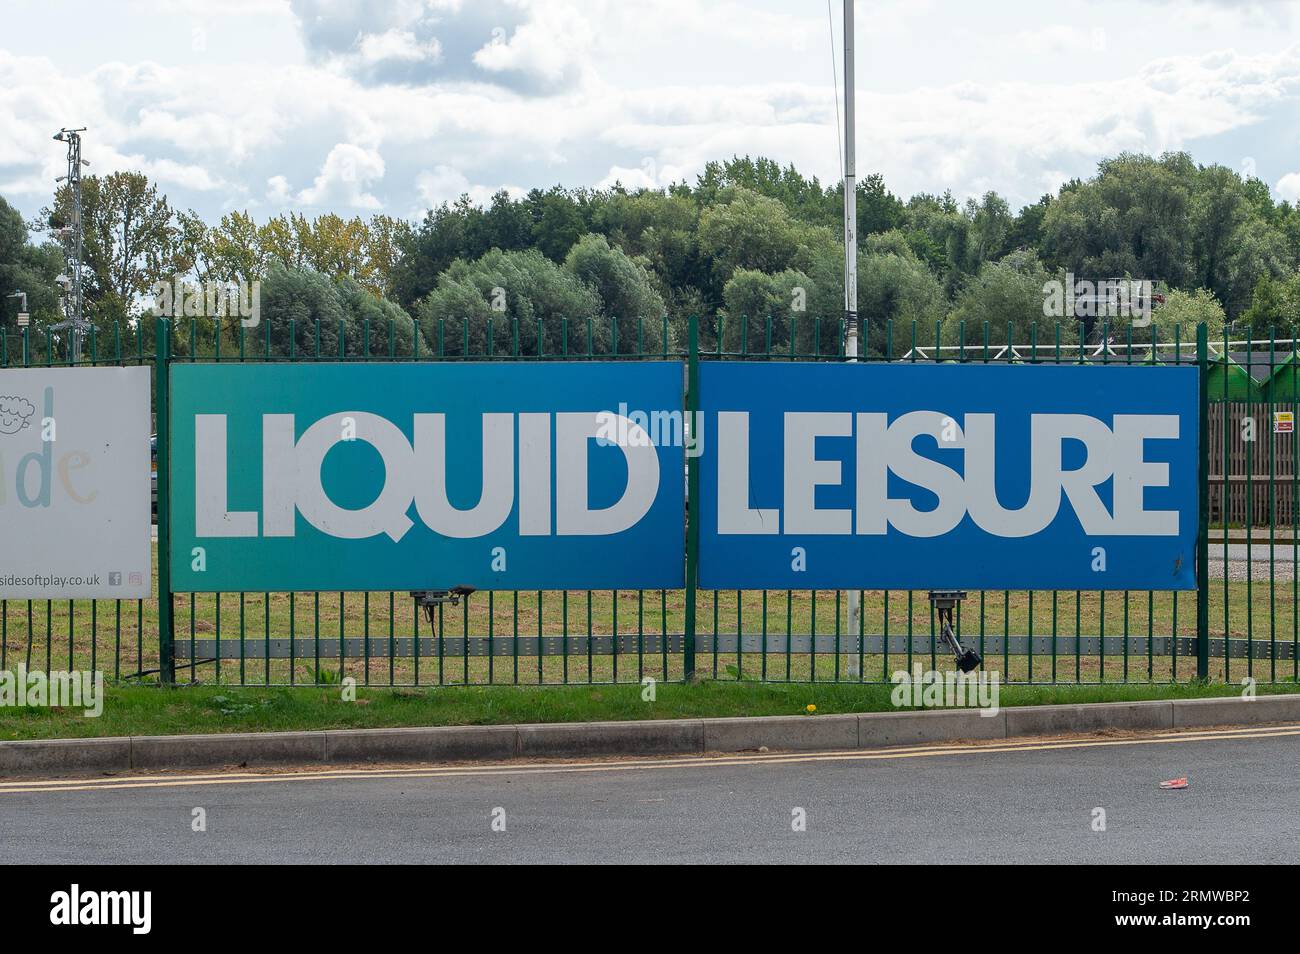 Datchet, Berkshire, UK. 30th August, 2023. The Liquid Leisure site in Datchet, Berkshire. Kyra Hill aged 11 attended a birthday party at Liquid Leisure on 6th August, 2022 but she was found just after 5.10pm and rushed to Wexham Park Hospital, where she was pronounced dead. At a hearing yesterday at the Berkshire Coroner's Court, the Senior Coroner, reporting on the post mortem, found that Kyra Hill, tragically died from drowning. Credit: Maureen McLean/Alamy Live News Stock Photo